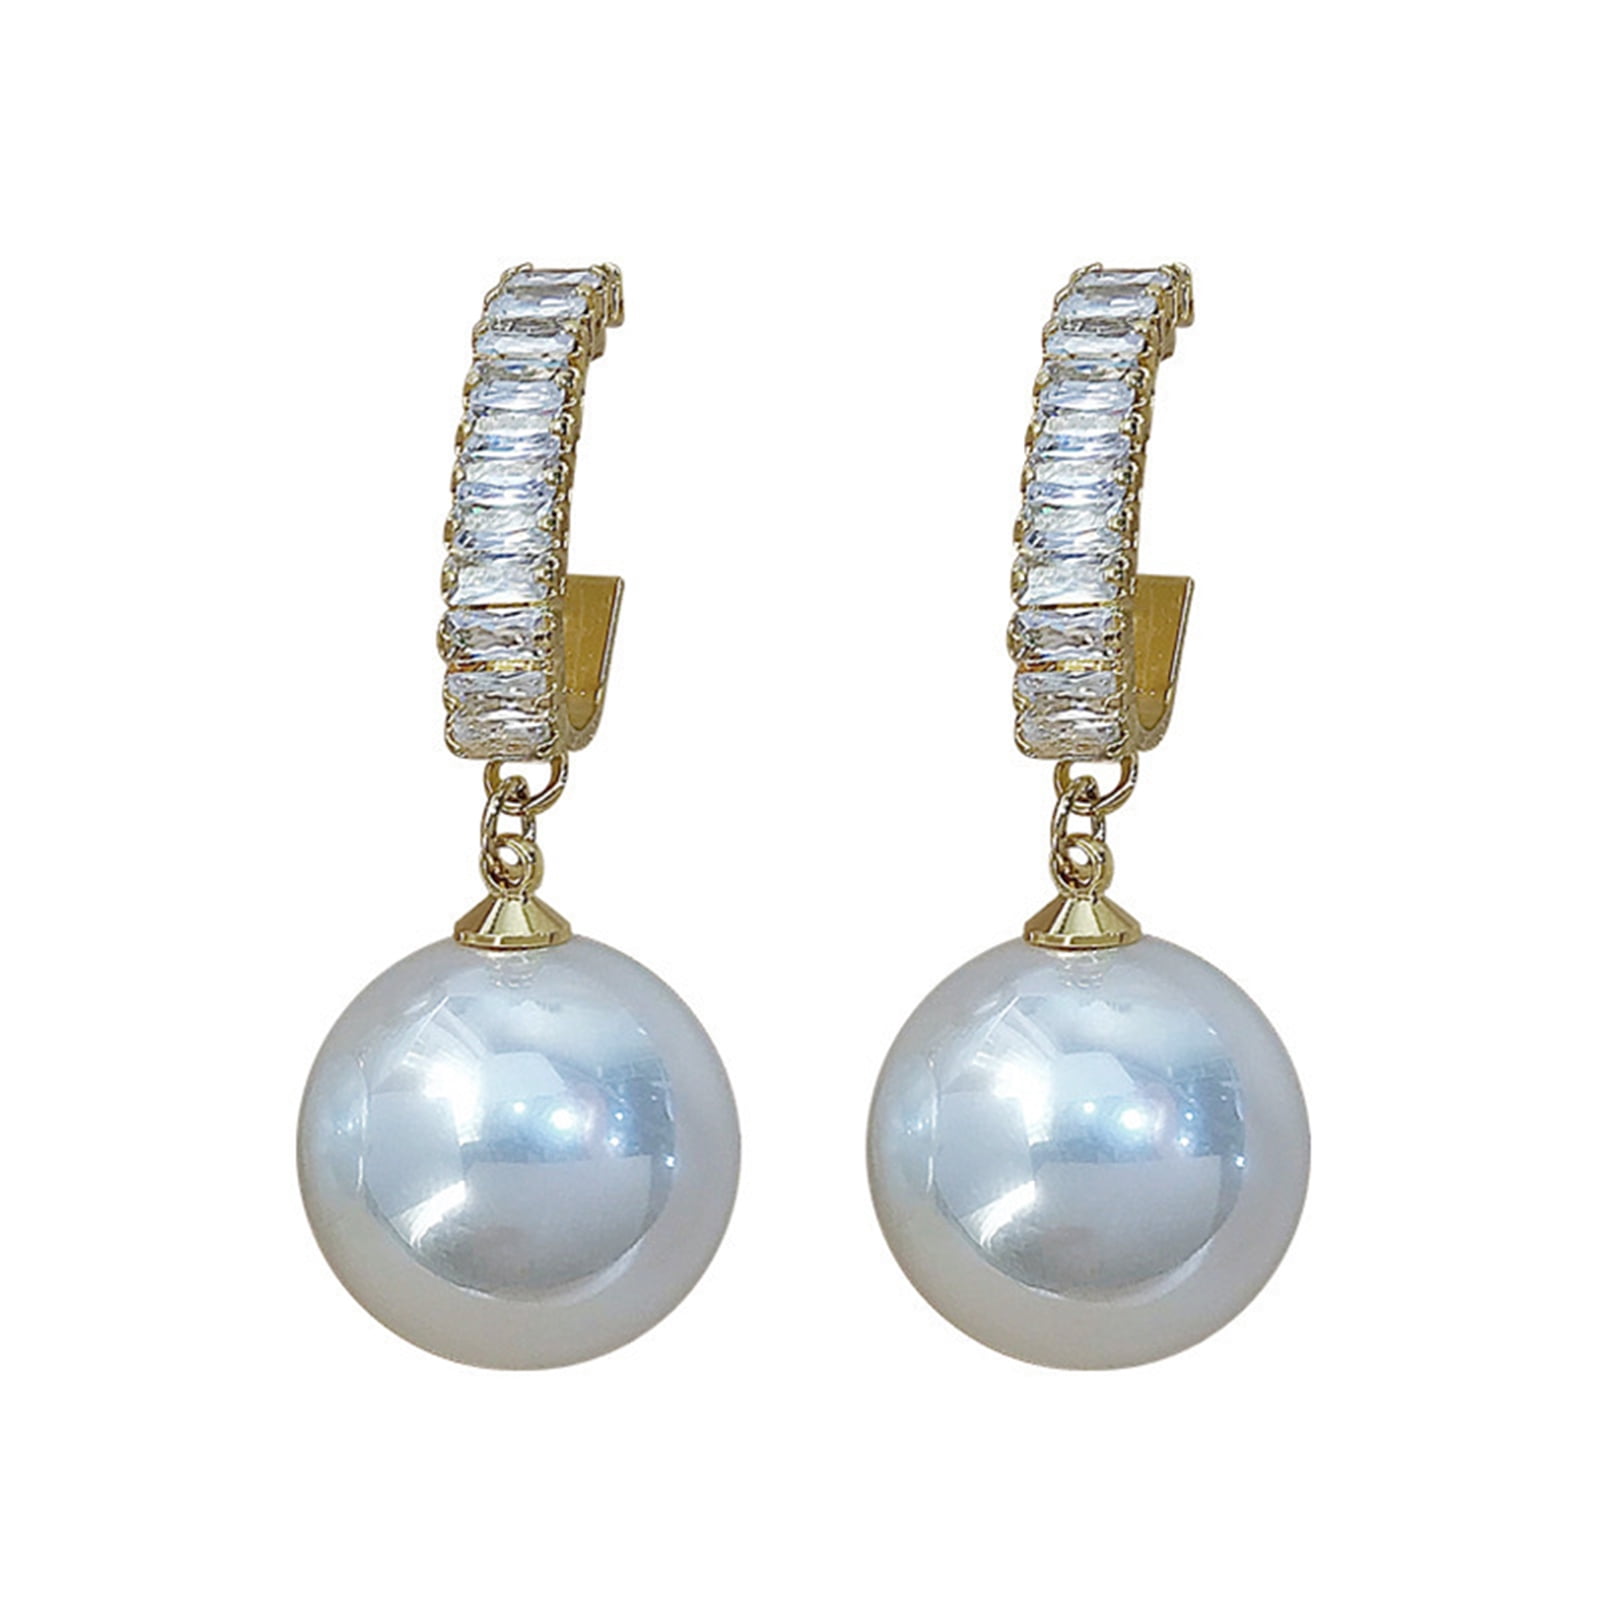 Details about   White Baroque Pearl Earring 18k Gold Ear Drop Dangle Party Luxury Jewelry 